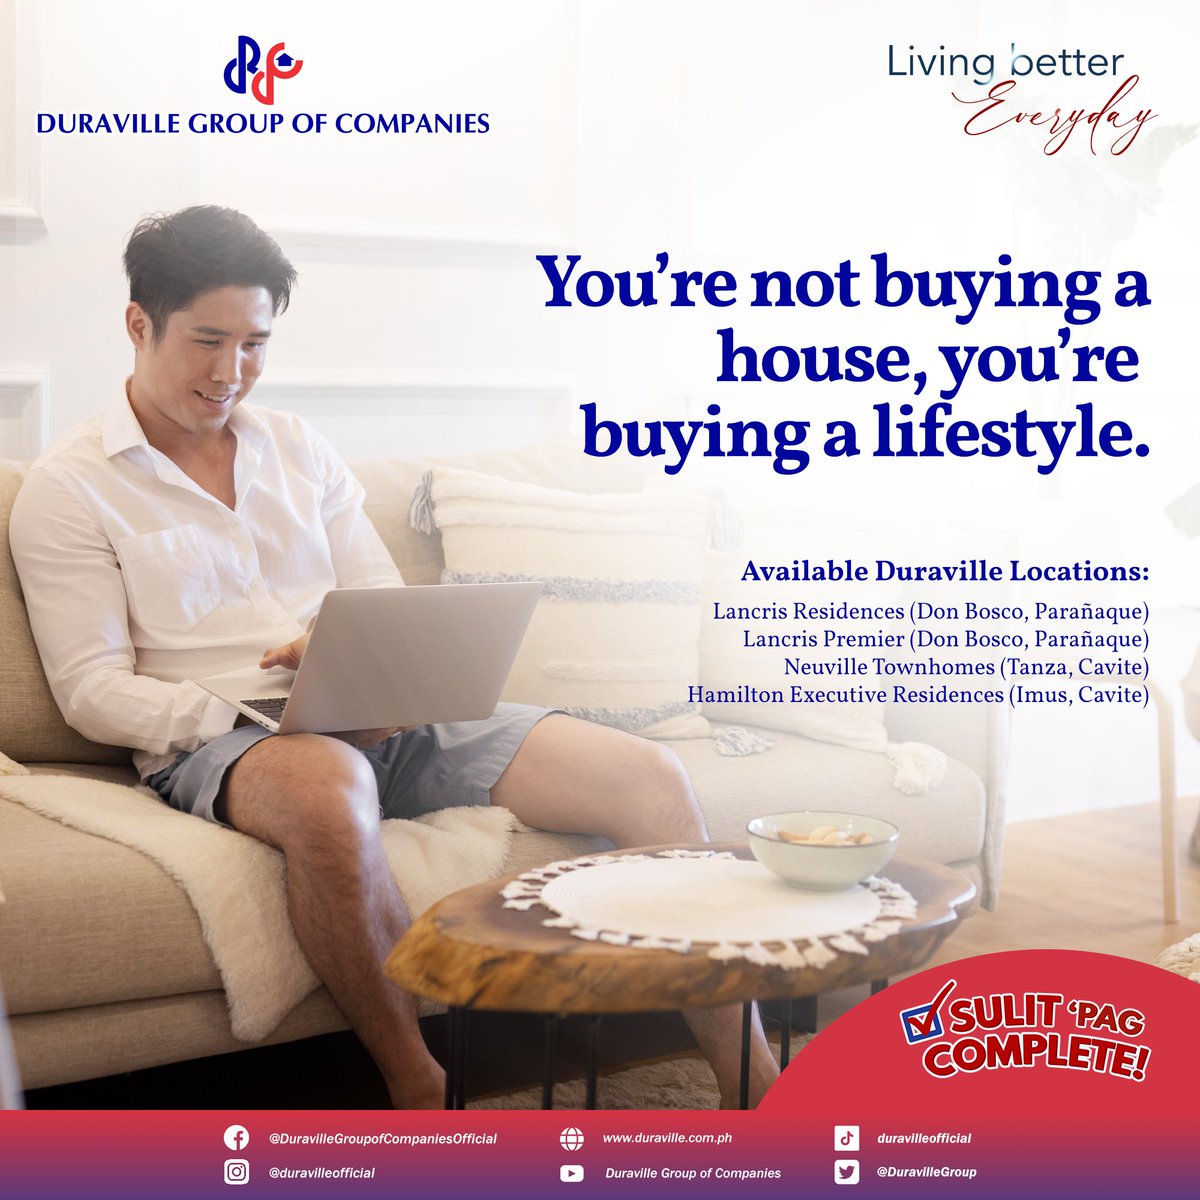 Your new home is about living a lifestyle. And that’s what you get with Duraville Homes!

Send us a message today or visit duraville.com to know more!

#Duraville #LivingBetterEveryday #SulitPagComplete #RealEstatePH #Apartment #Condo #HouseAndLot #AffordableHome